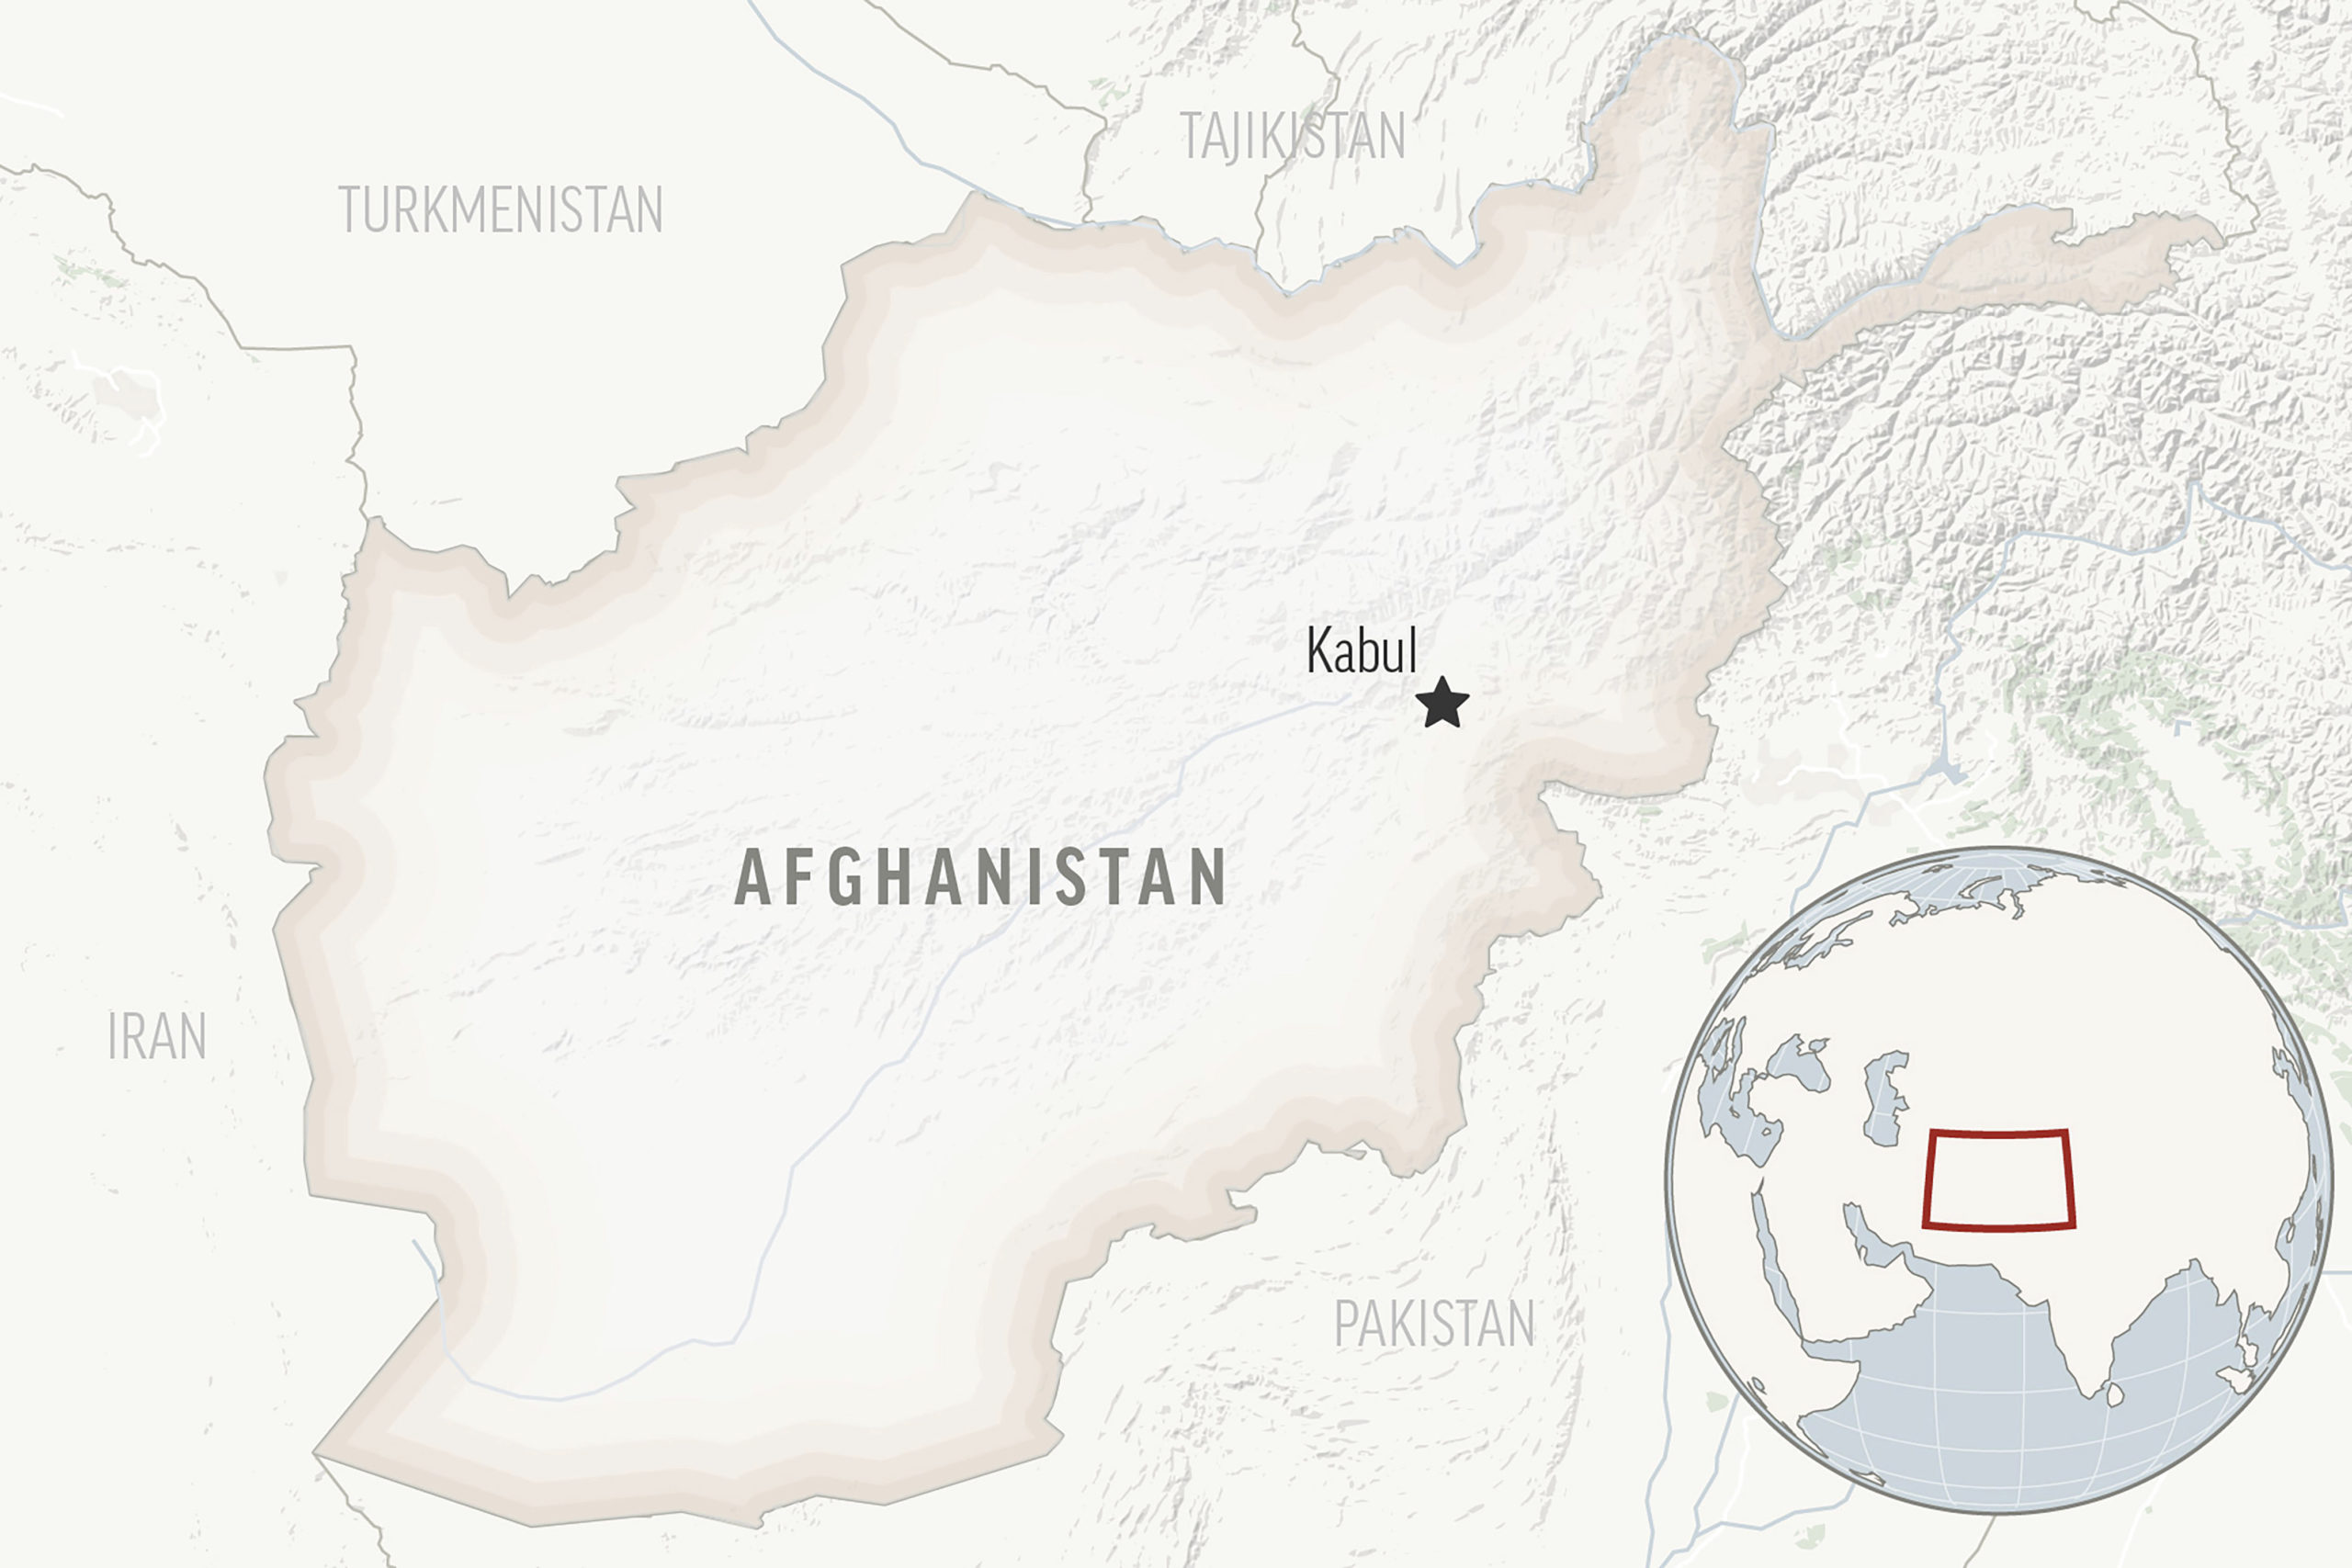 This is a locator map for Afghanistan, showing its capital, Kabul.